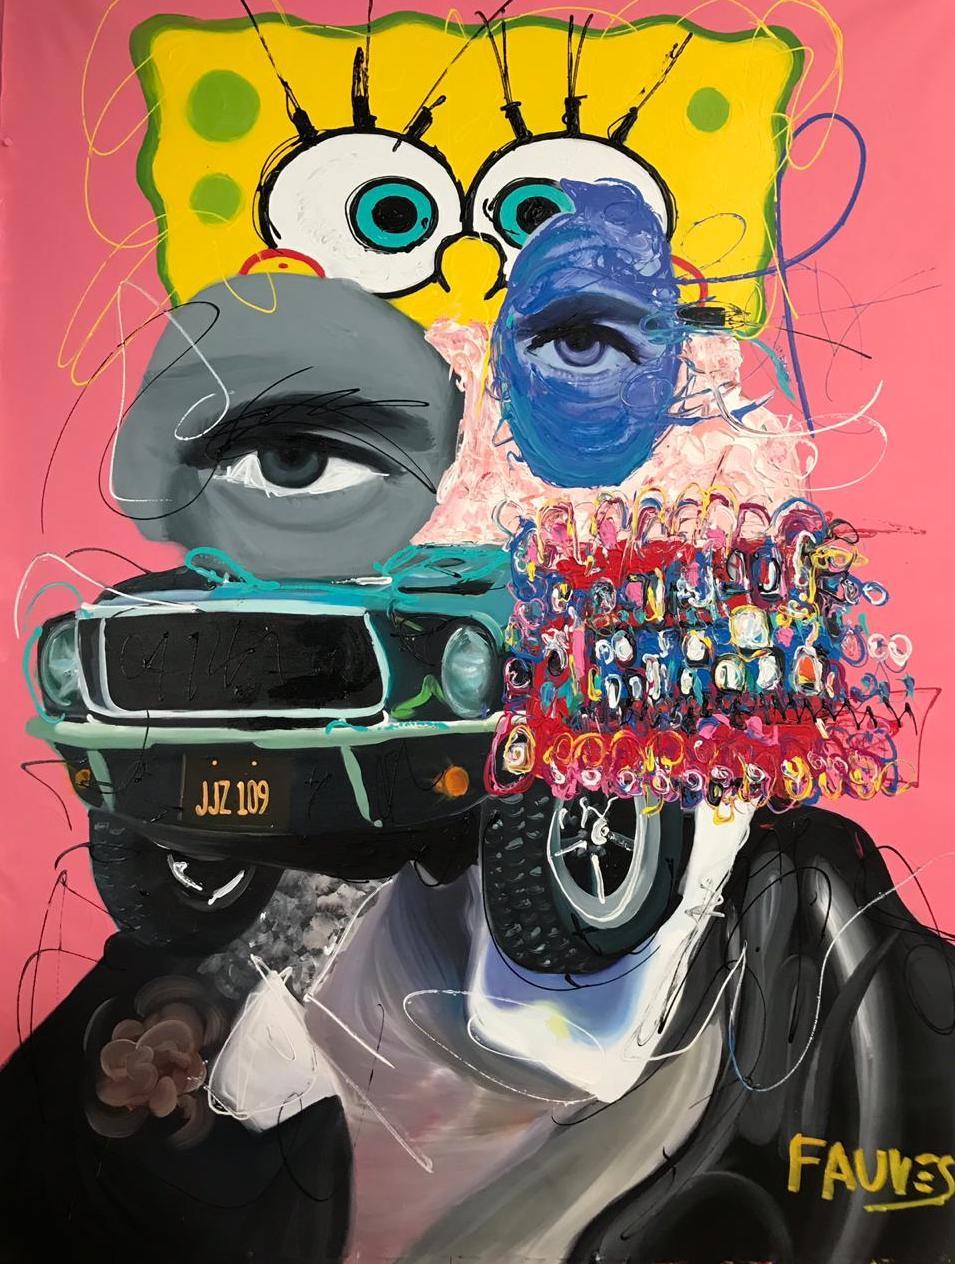 "Breaking Good" mixed media painting 70x54 inch by John Paul Fauves 